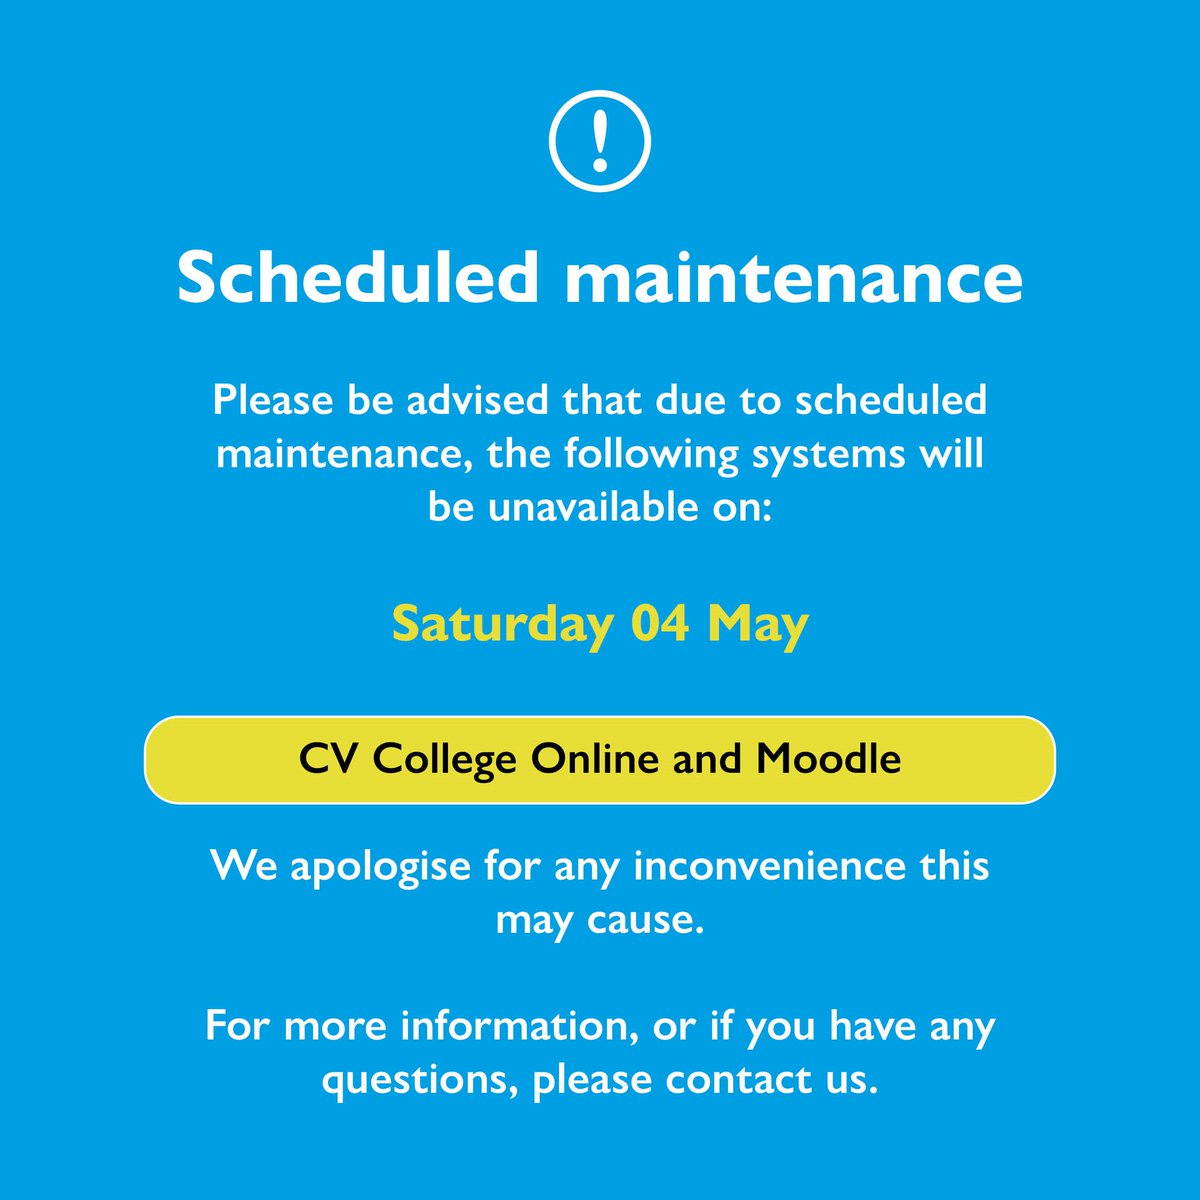 🔧Scheduled maintenance alert! 

📢 We apologise for any inconvenience this may cause. Your understanding is greatly appreciated.

For further assistance, reach out to us during office hours on ☎️ 01276 601701.

#CadetVocationalCollege #CVCollegeUK  #VocationalEducation